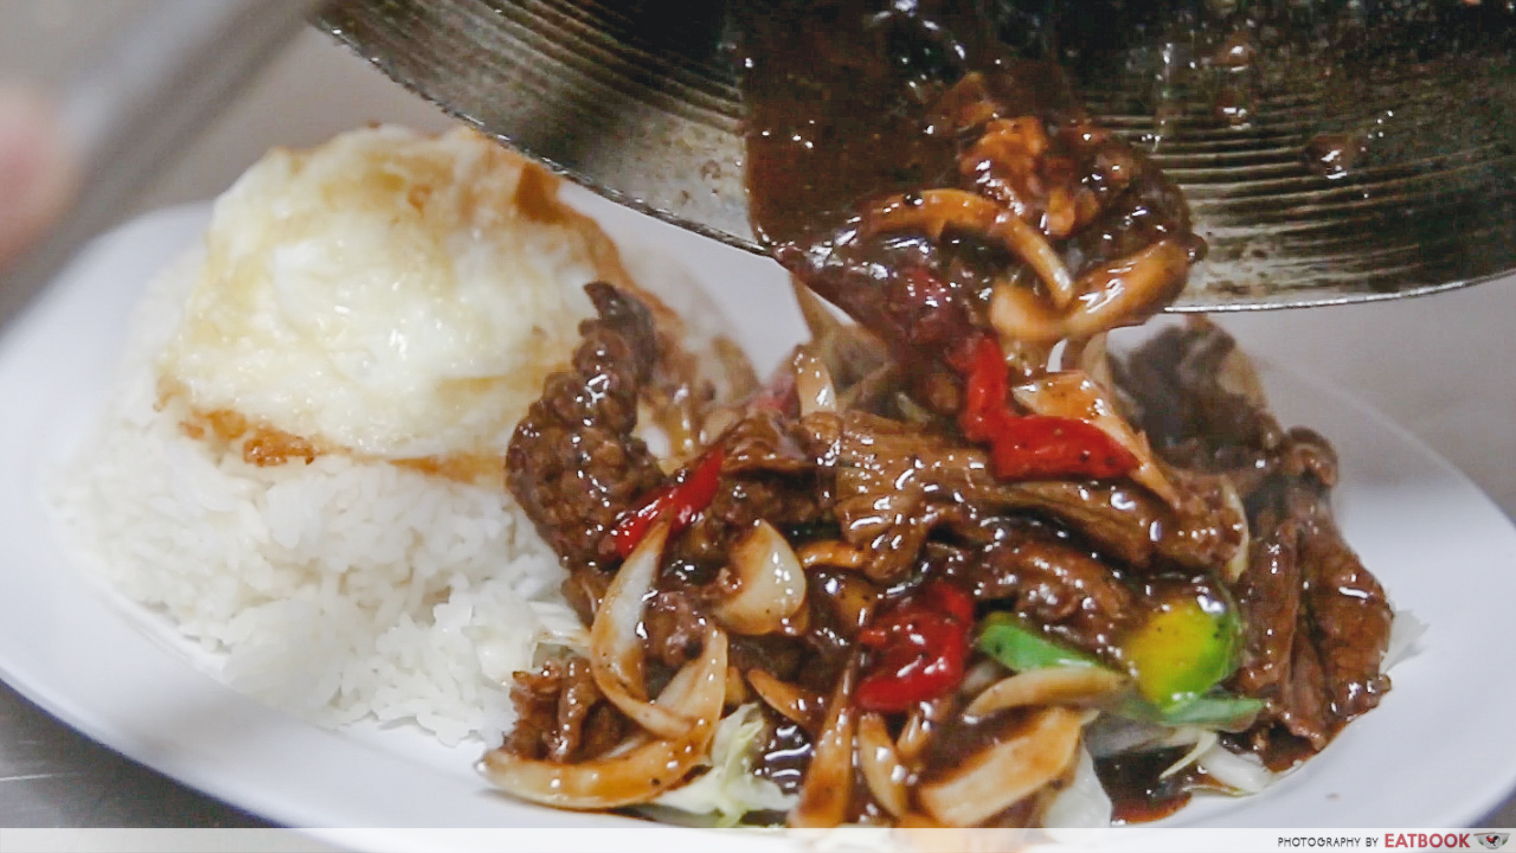 Ridhuan's Muslim Delights - Pouring black pepper beef